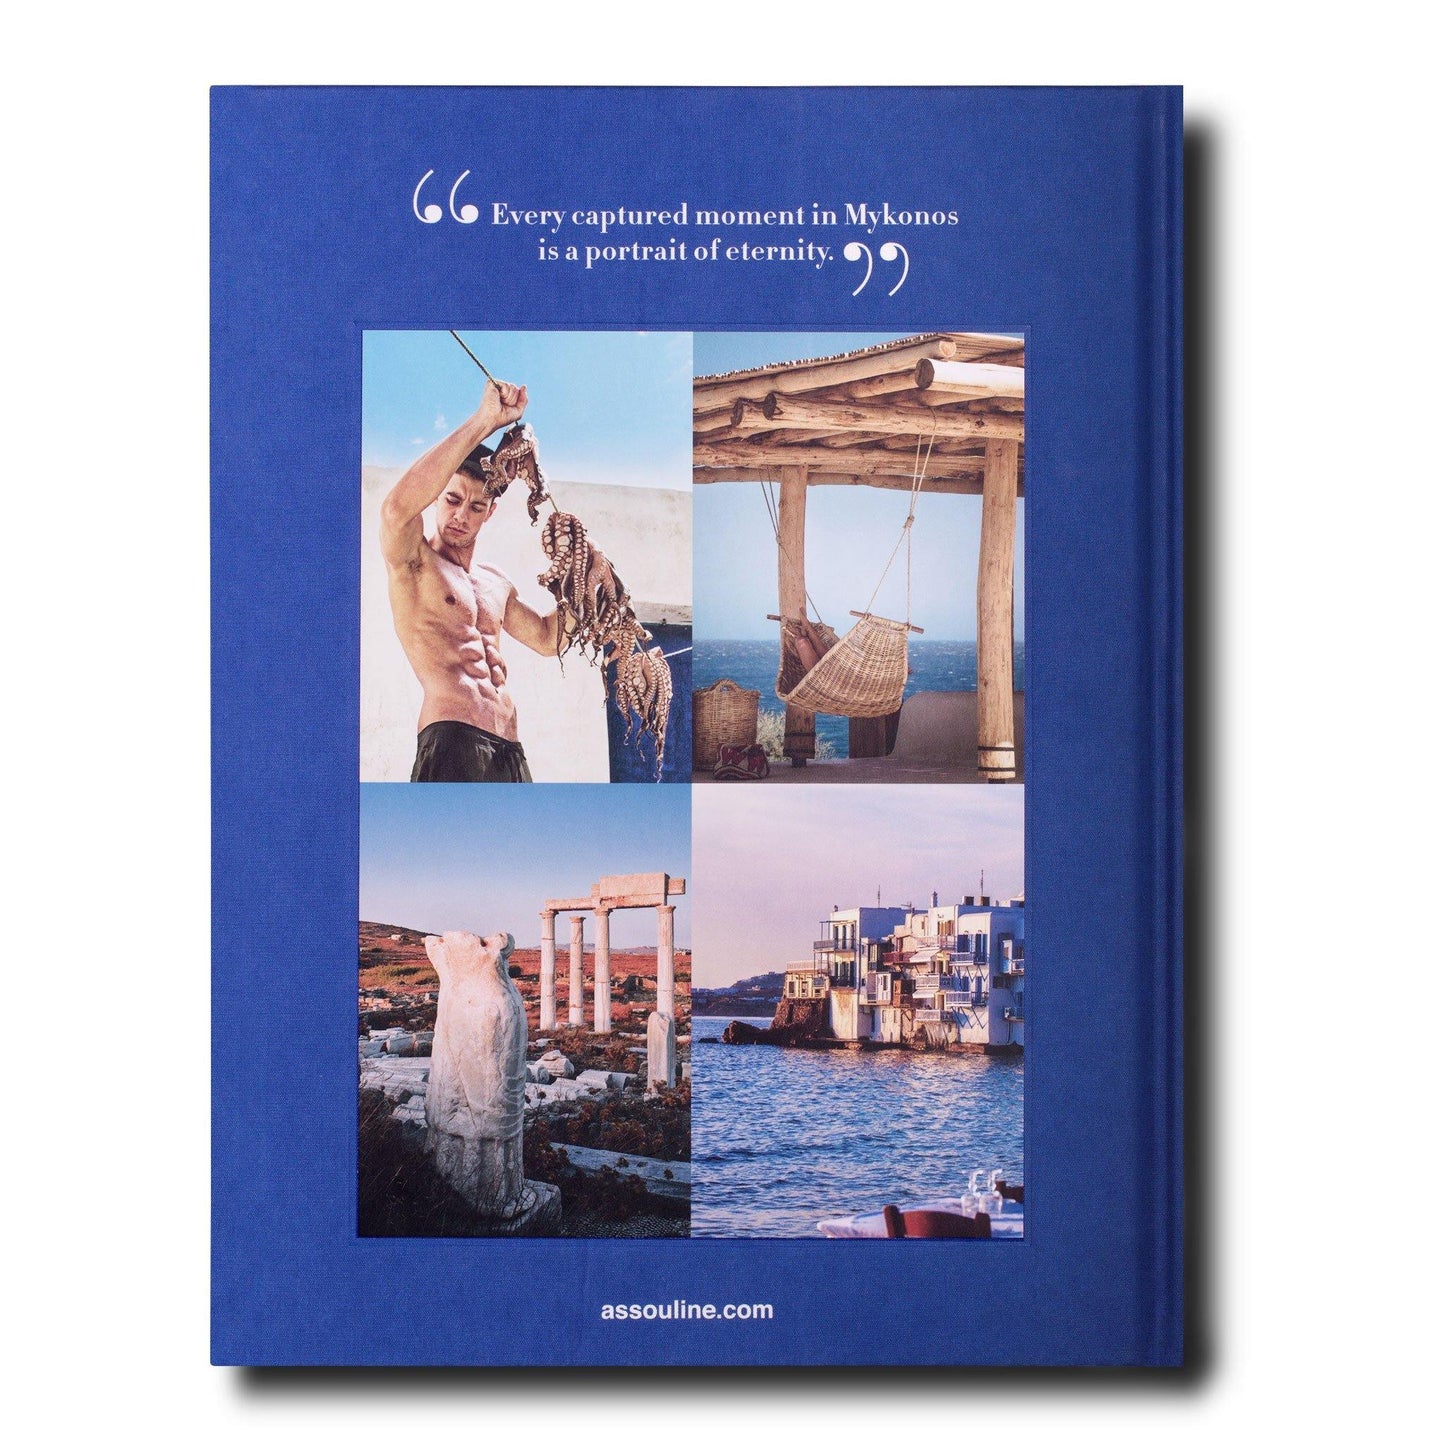 Mykonos Muse Coffee Table Book by Assouline - Haven